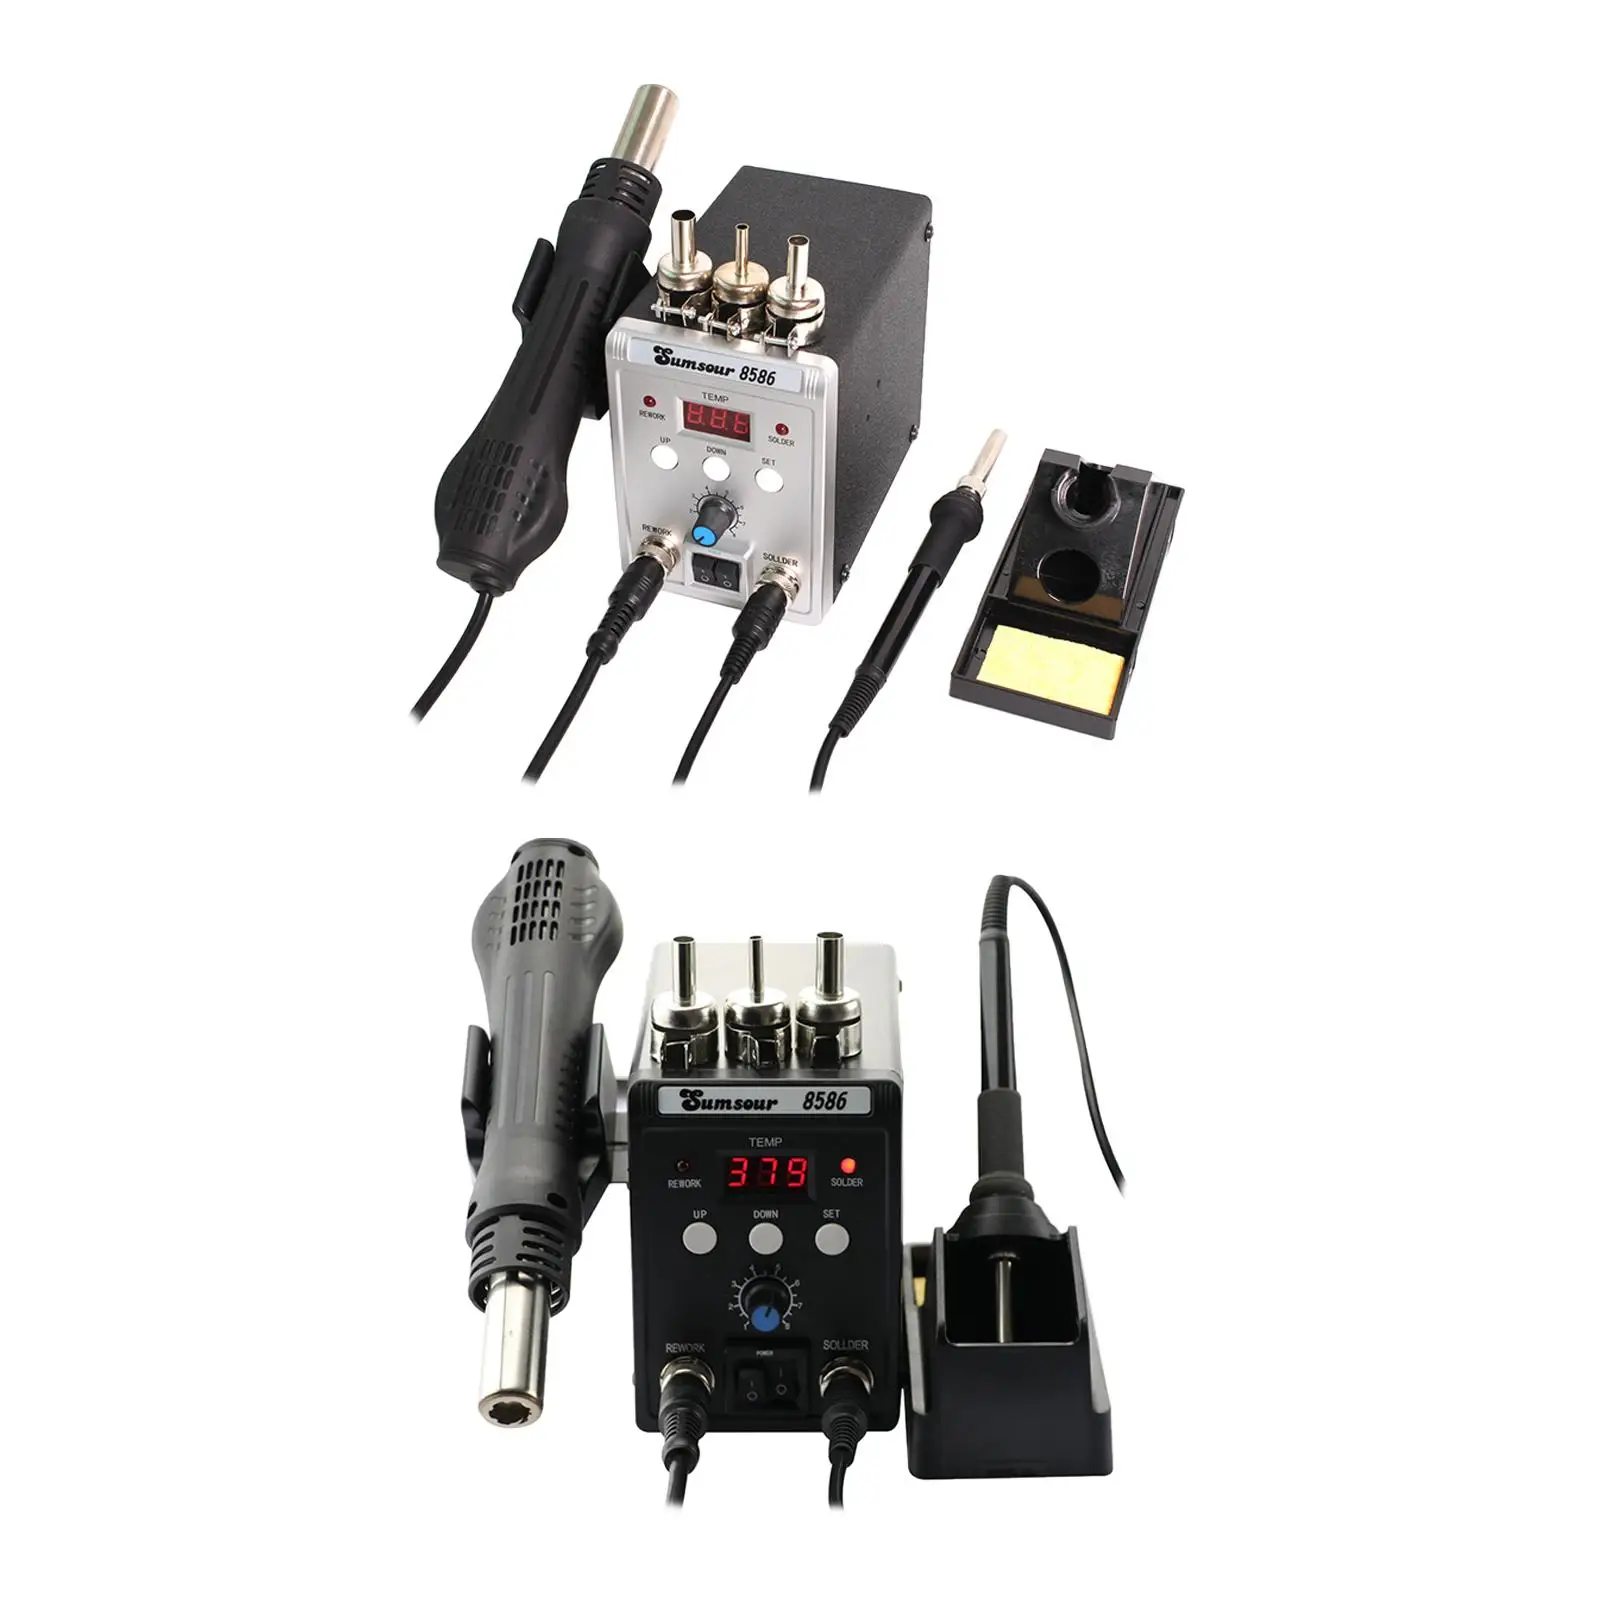 Electric Welding Tool Durable with Metal Holder 60W Soldering Station for DIY Repairs Phone Home Appliance Maintenance Laptop